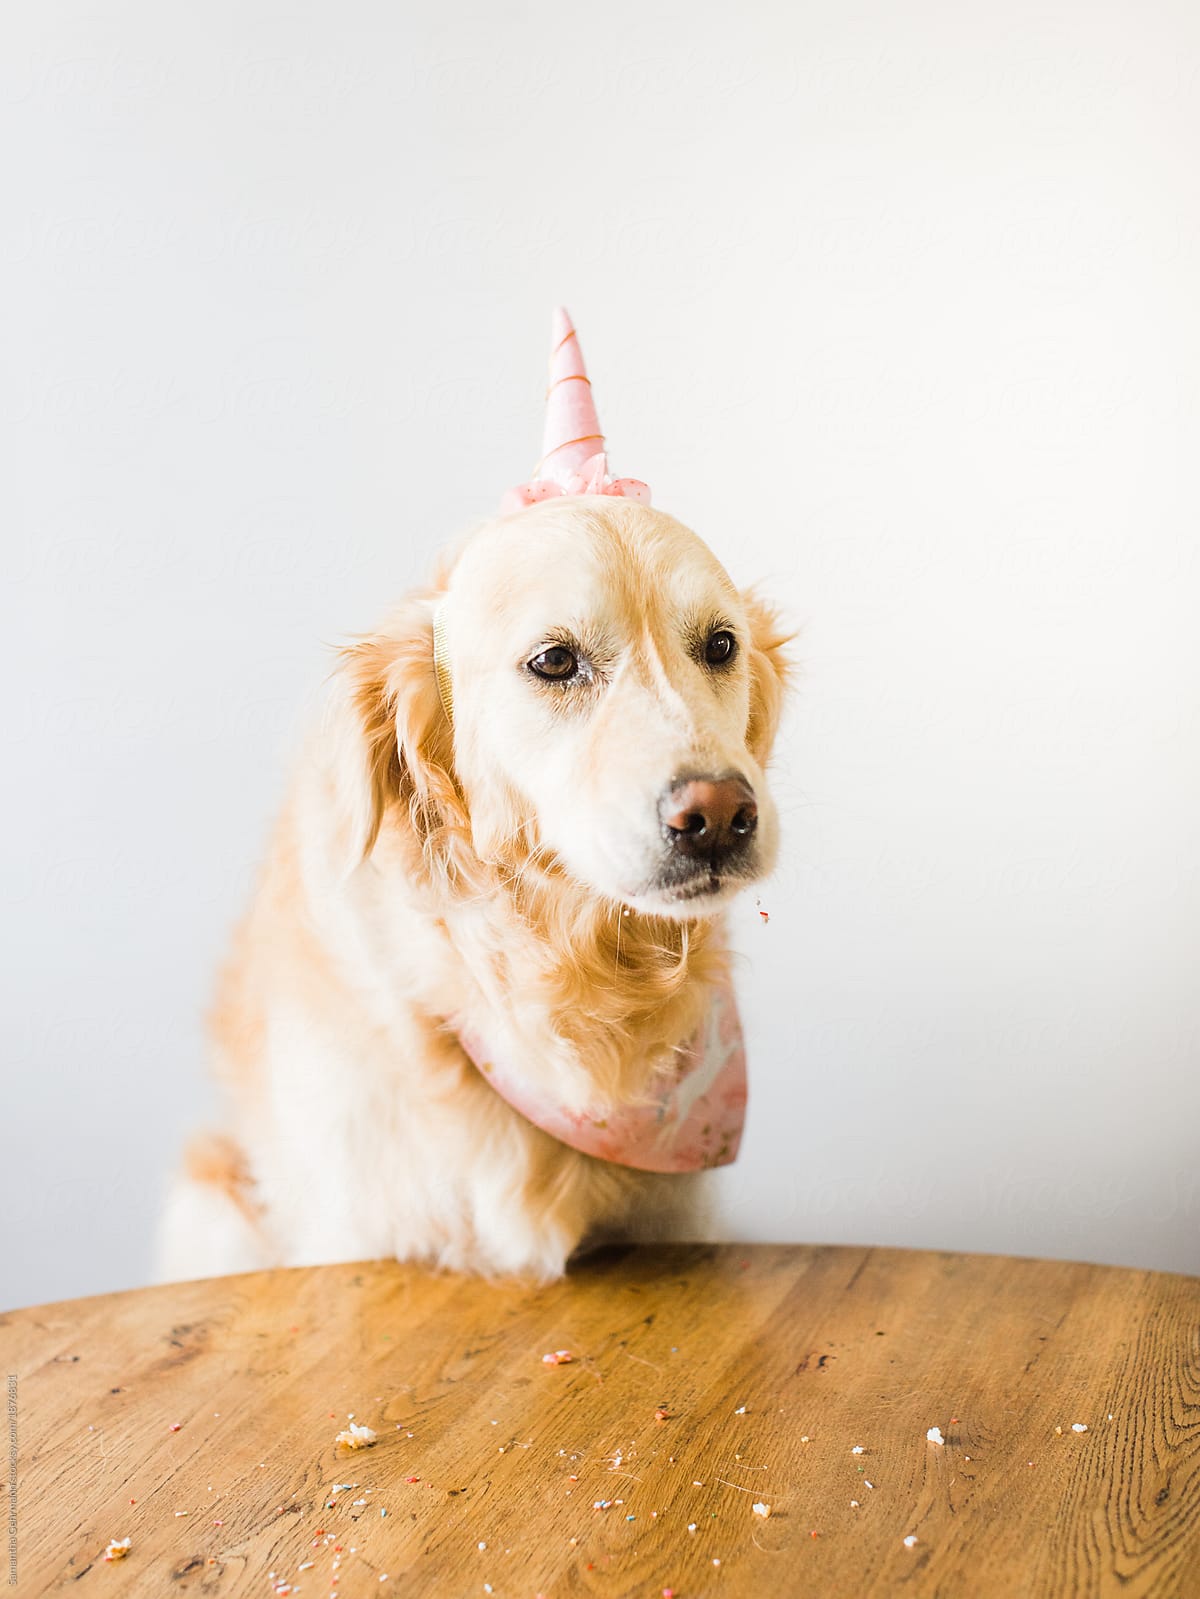 birthday Dog ate too much